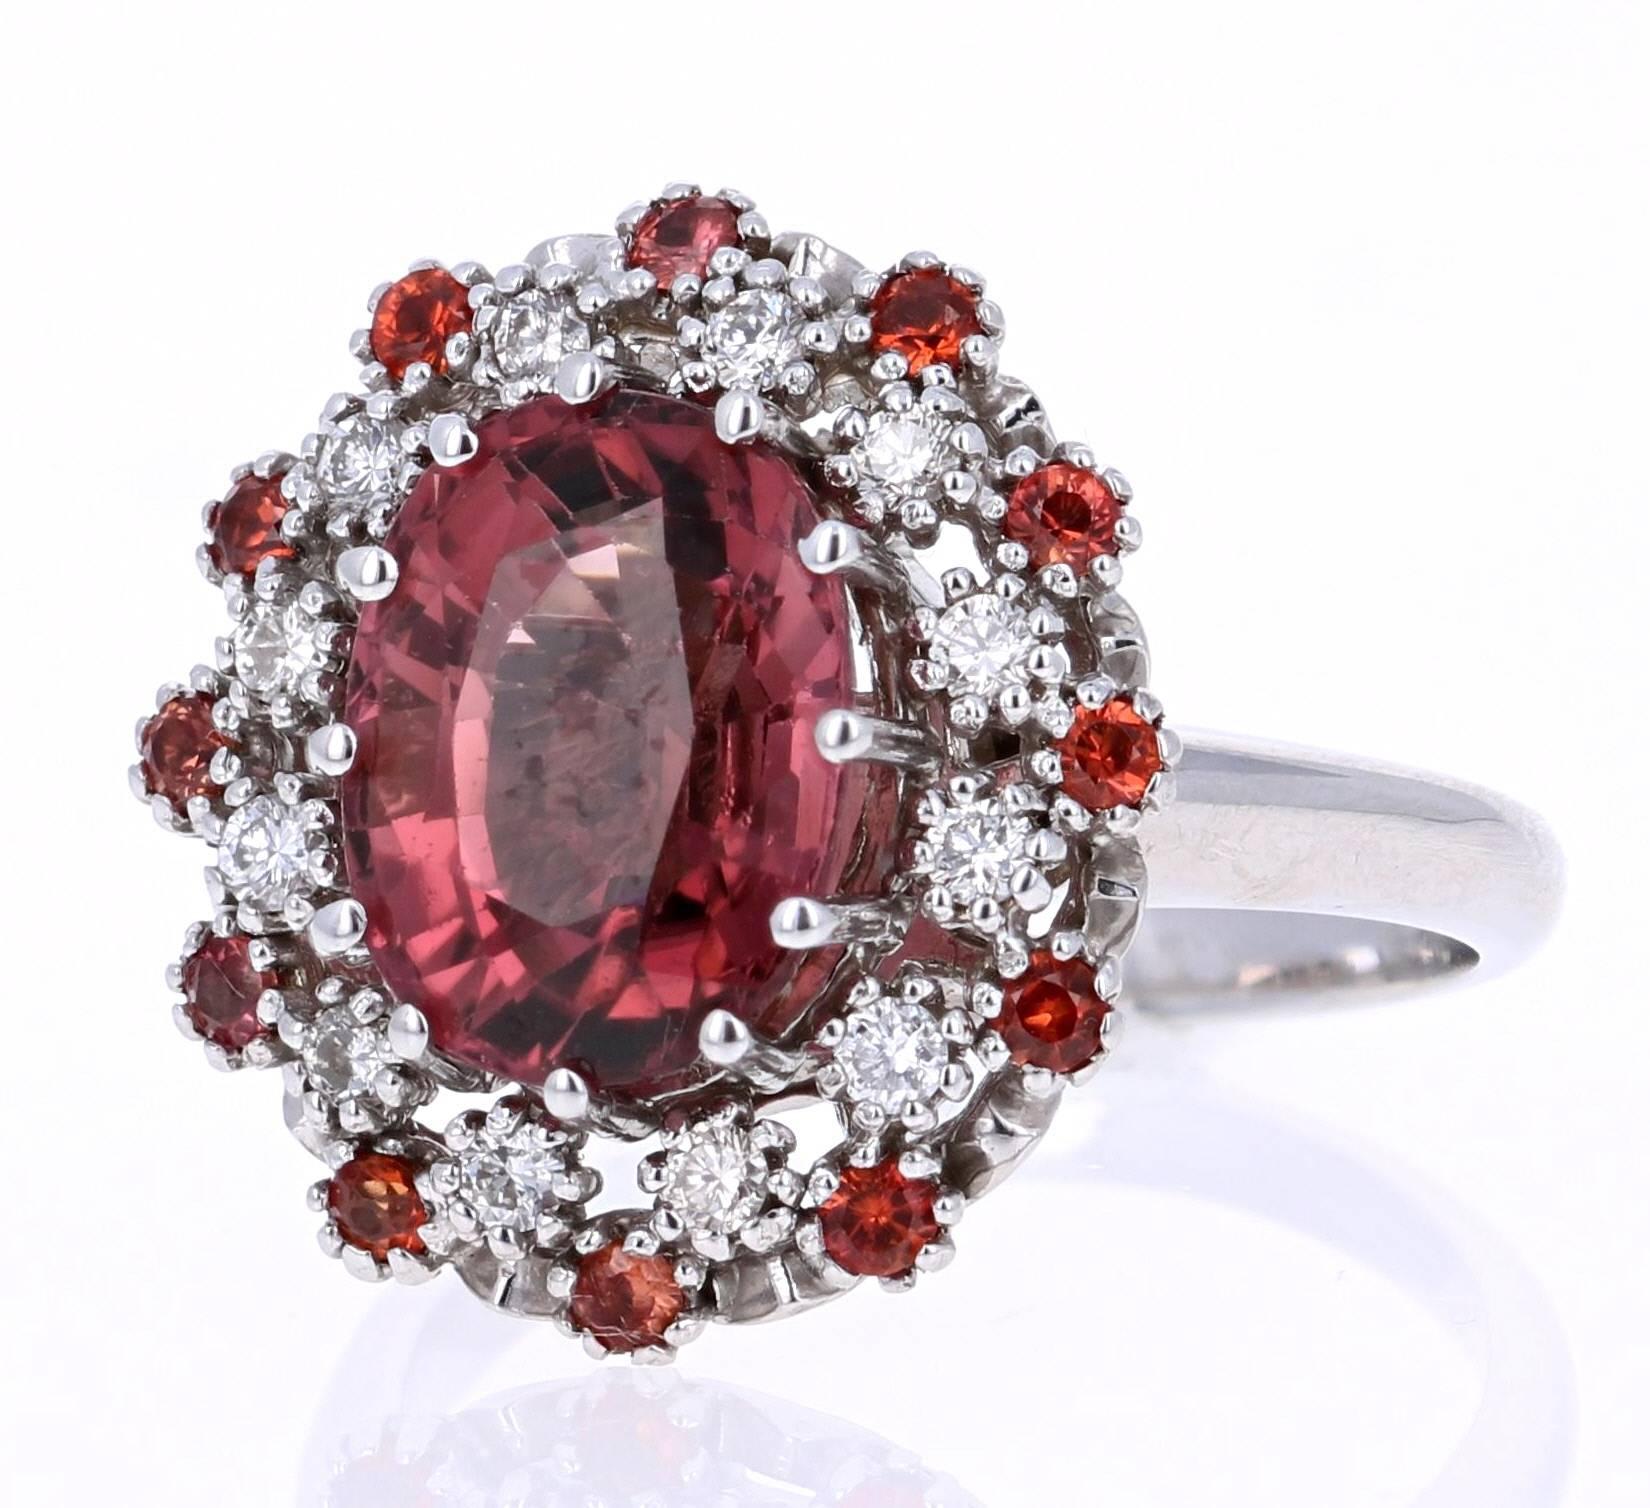 Stunning and uniquely designed 5.13 Carat Orange Sapphire Tourmaline Diamond White Gold Cocktail Ring!

This ring has a 4.46 carat Oval Cut Tourmaline that is set in the center of the ring and is surrounded by 12 Round Cut Orange Sapphires that